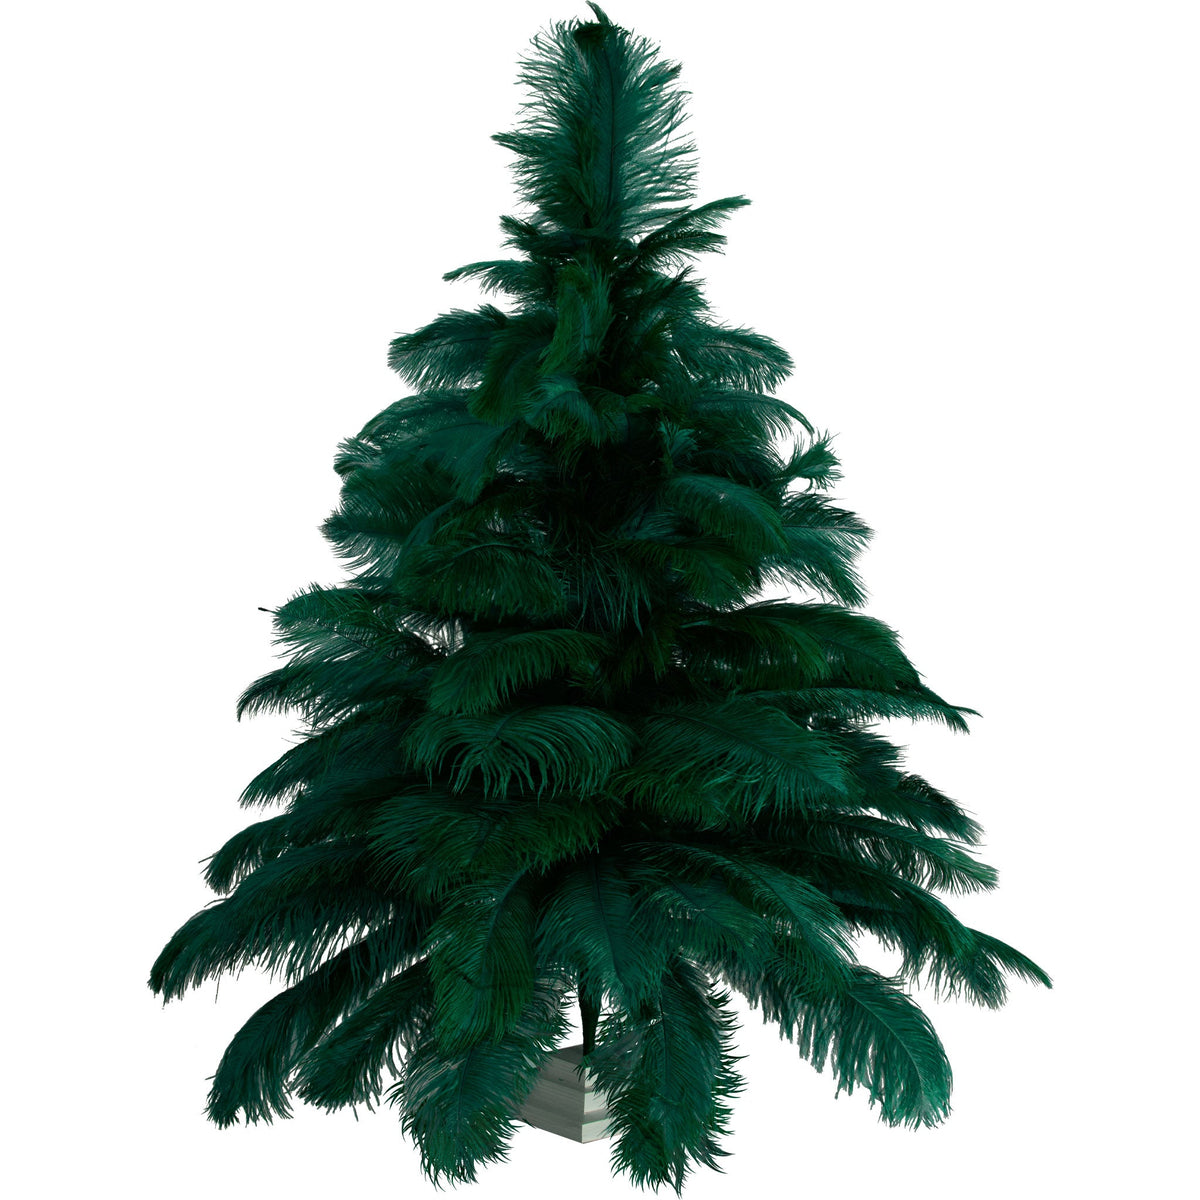 Introducing Lee Display's brand new Green Ostrich Feather Christmas Trees! Made with real ostrich feathers